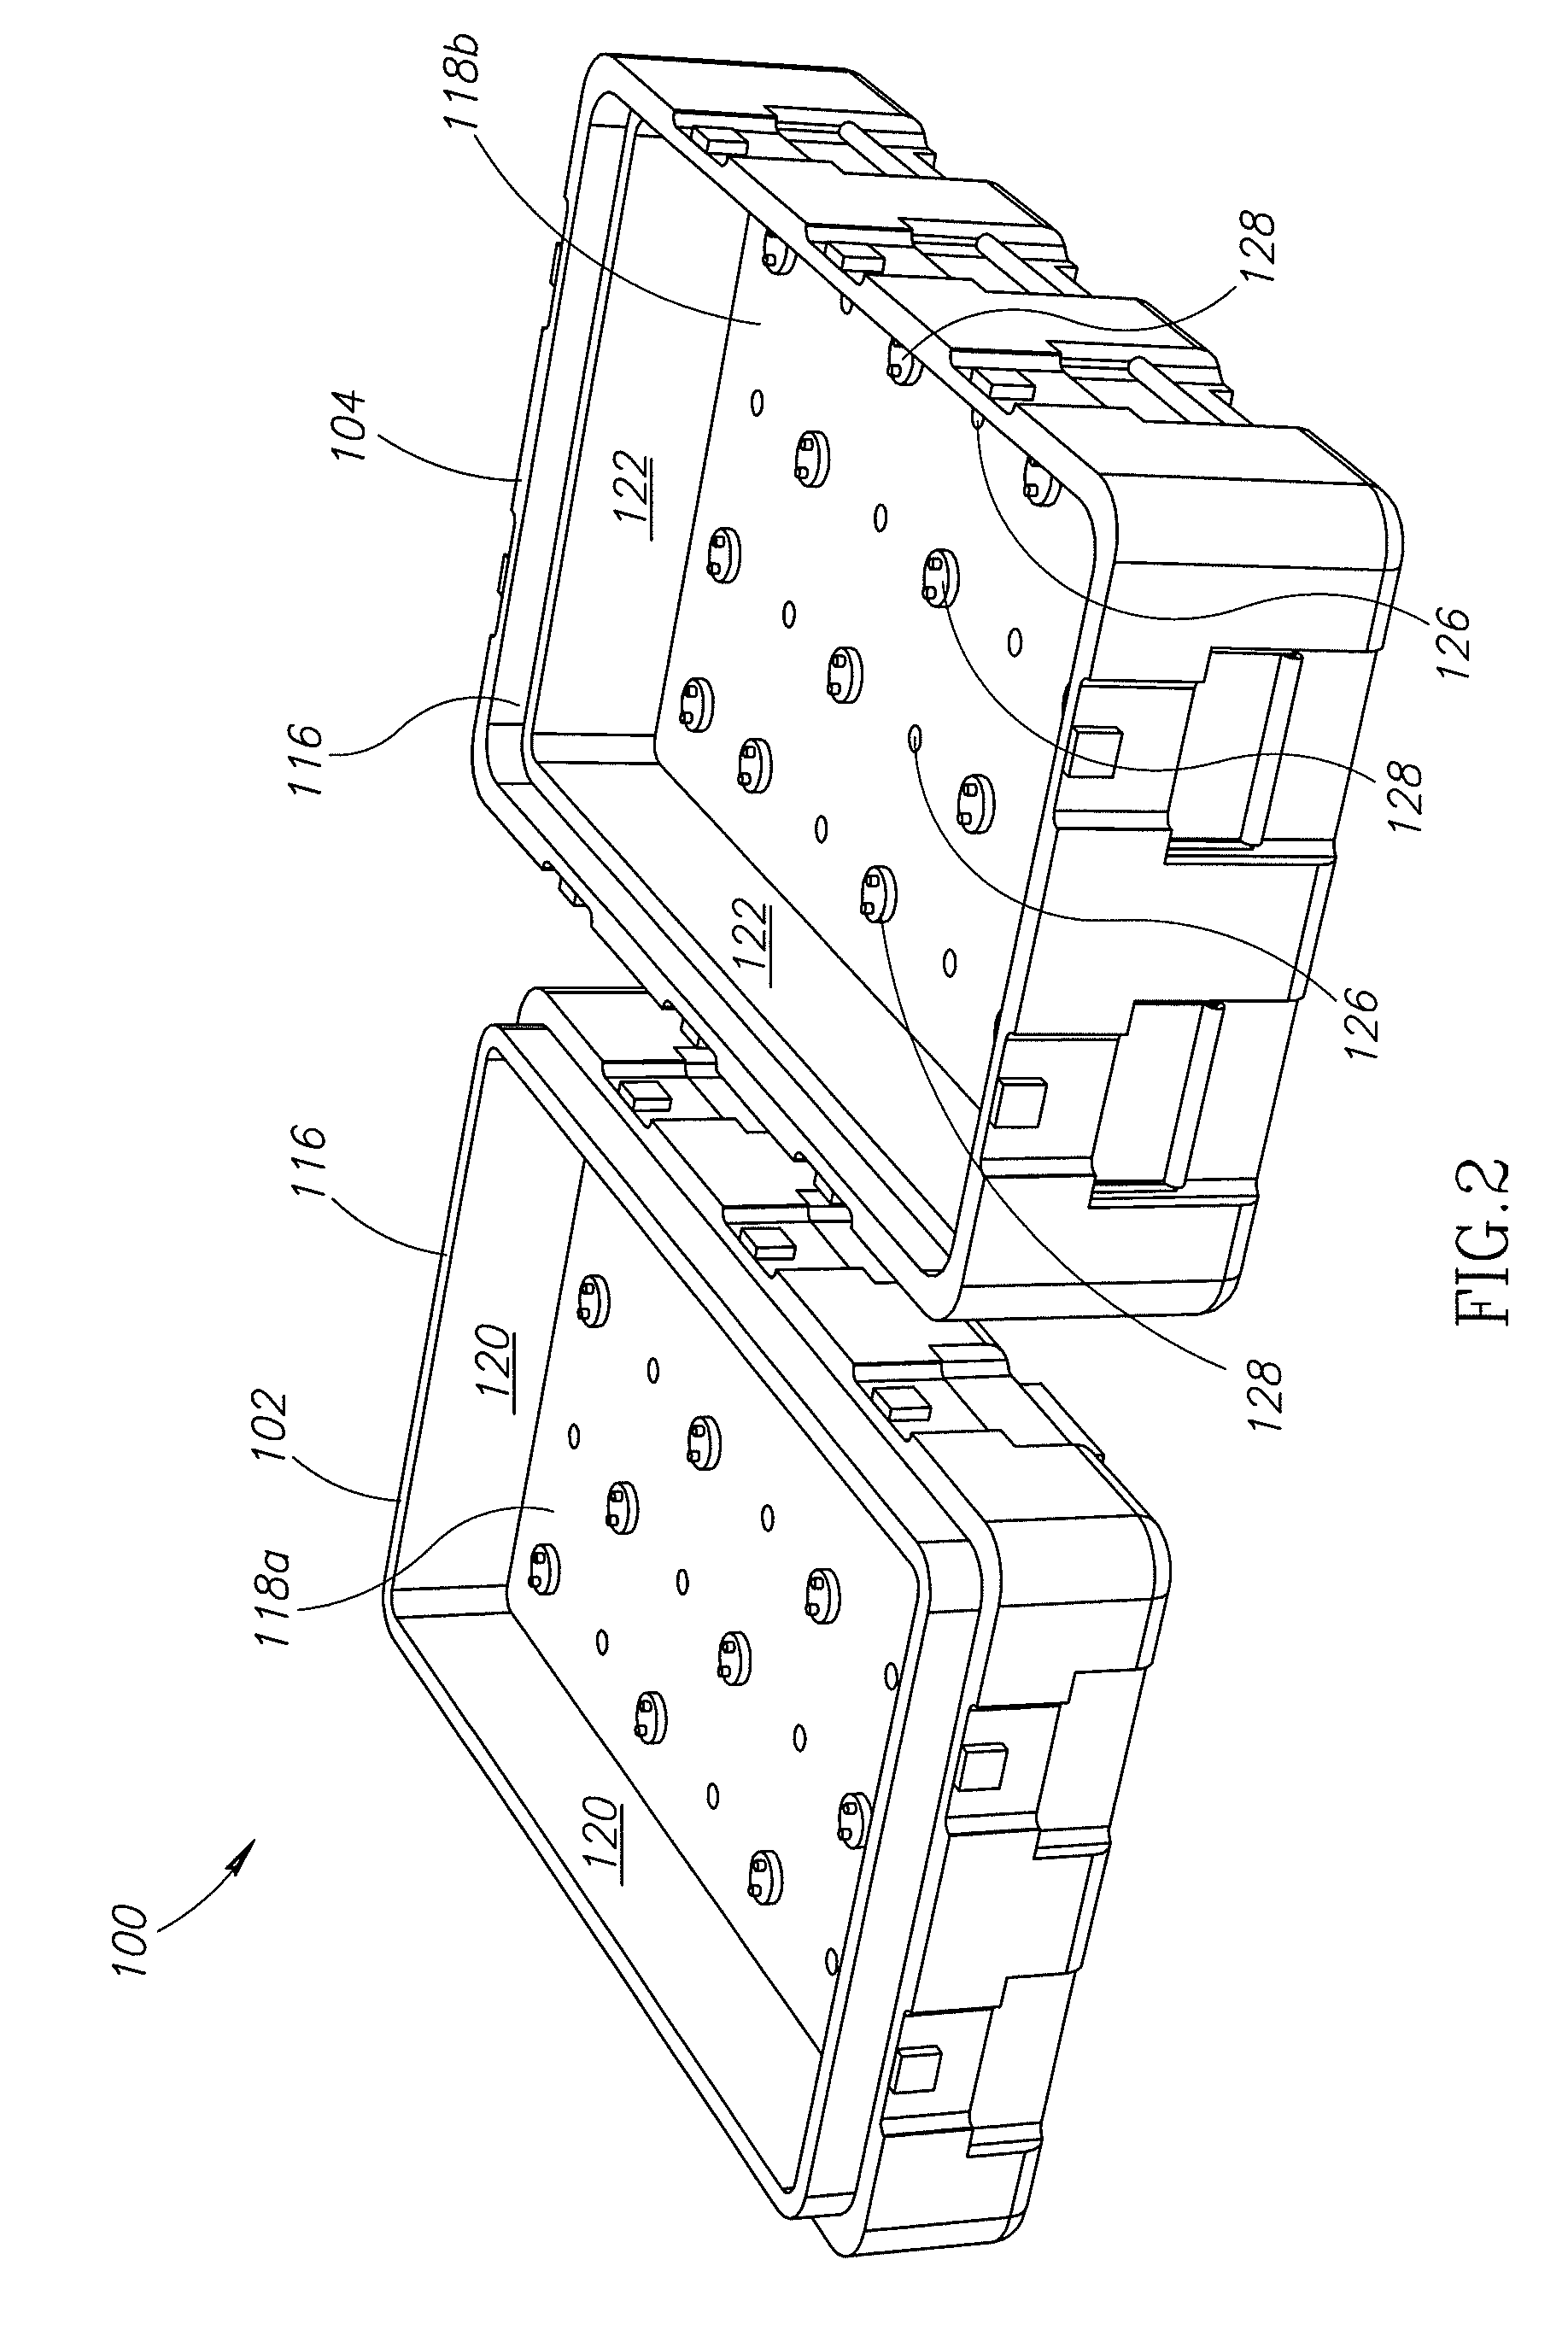 Strengthened equipment cases and methods of making same